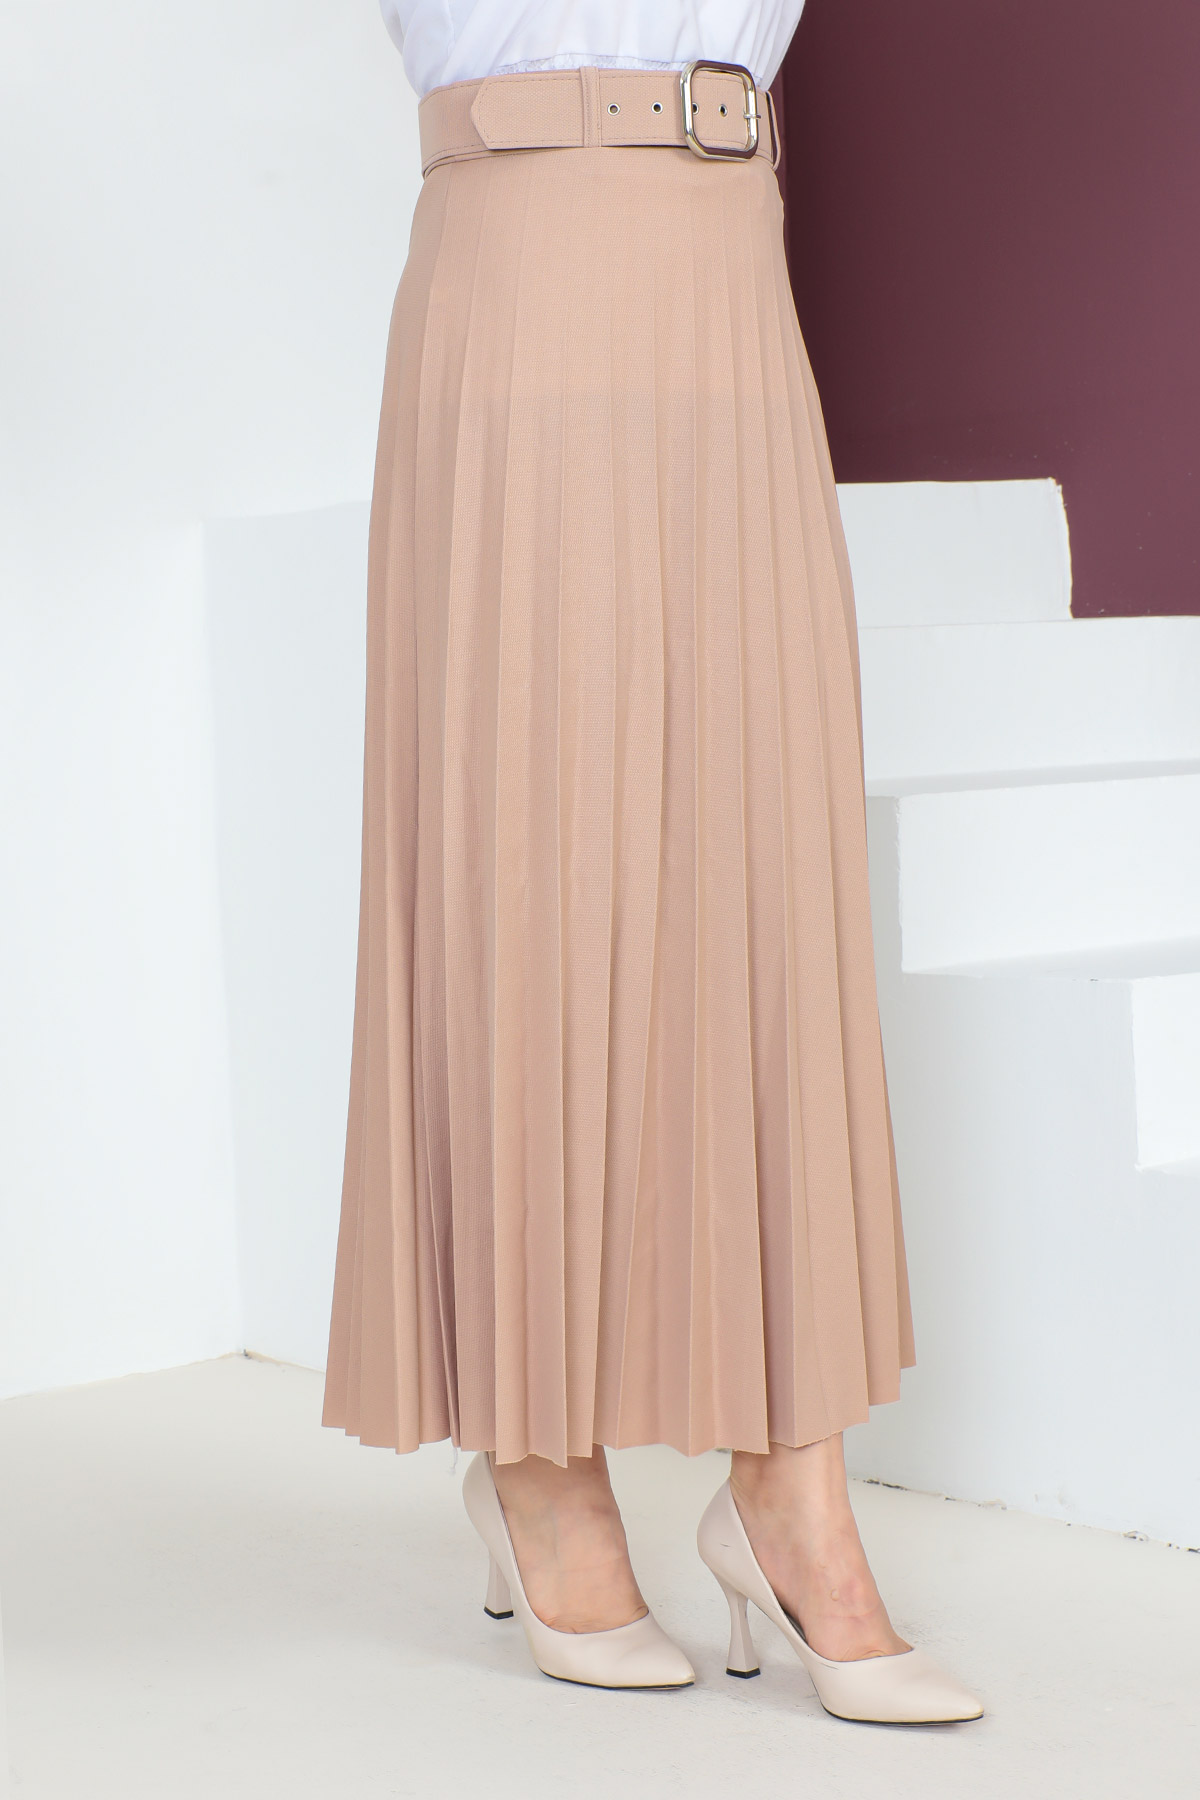 Arched Pleated Skirt TSD230113 Light Pink